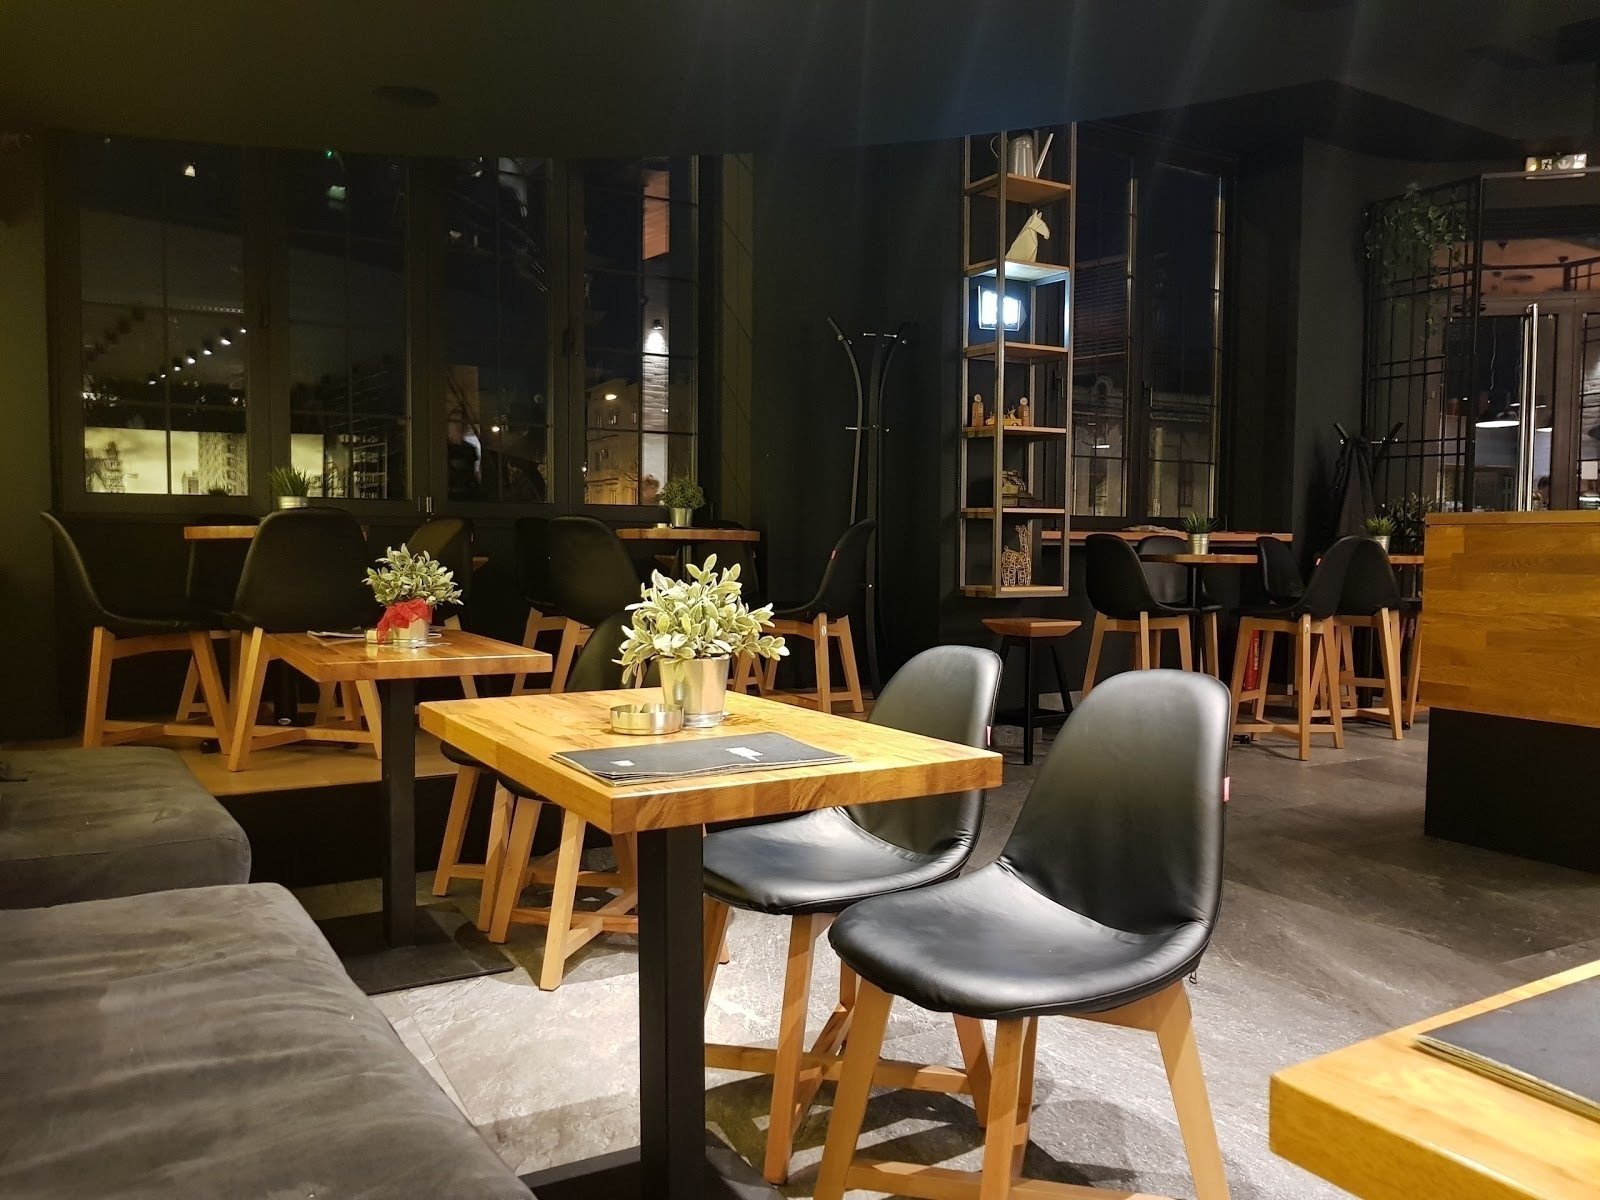 <span class="translation_missing" title="translation missing: en.meta.location_title, location_name: De-Tox The Angle Cafe, city: Belgrade">Location Title</span>